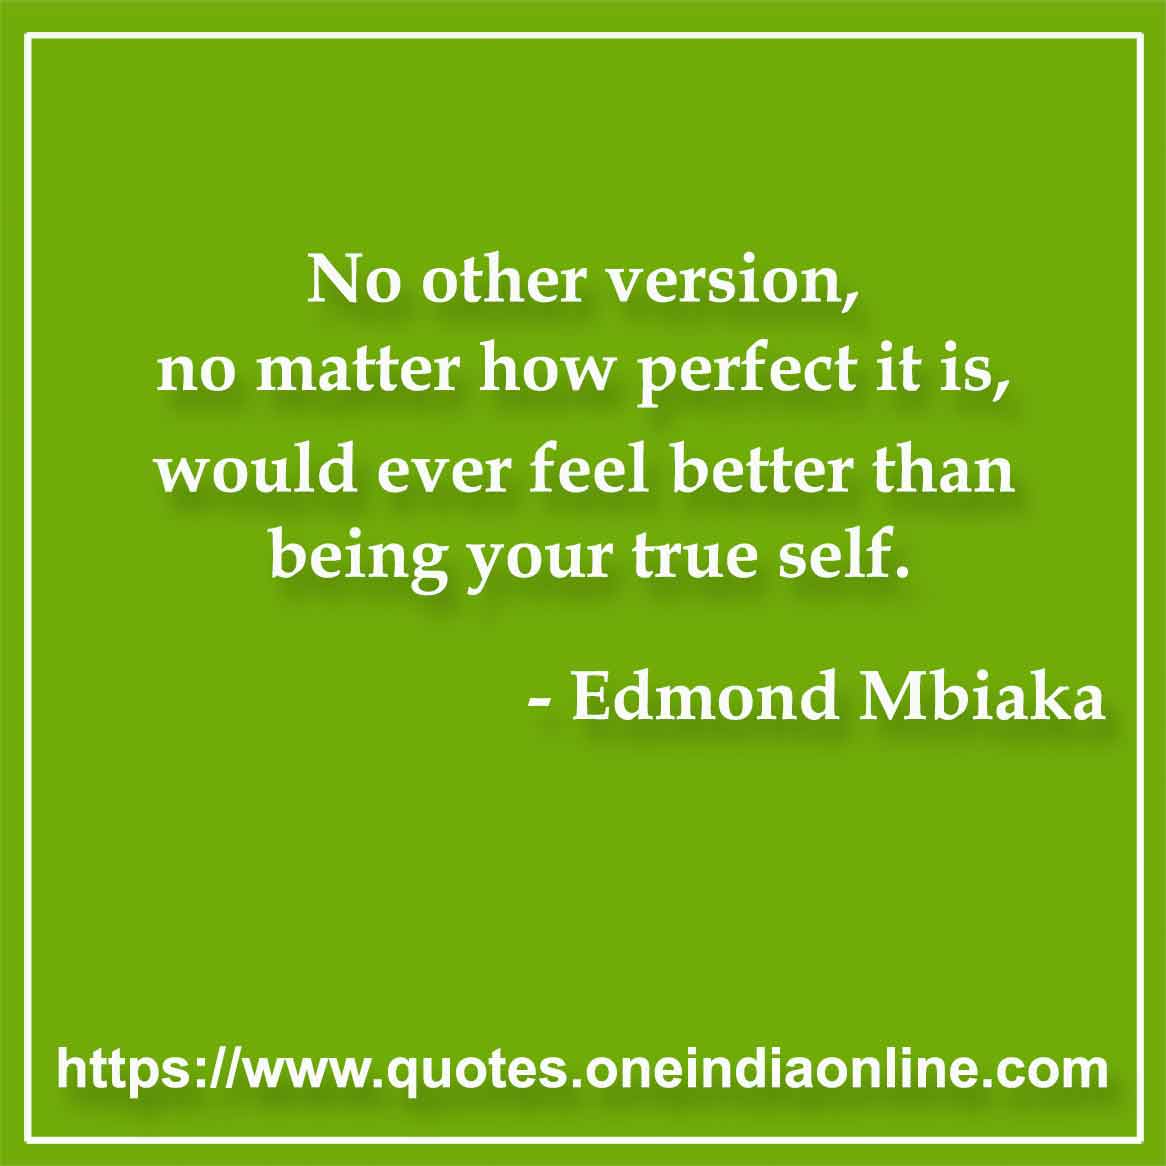 No other version, no matter how perfect it is, would ever feel better than being your true self.

- Edmond Mbiaka